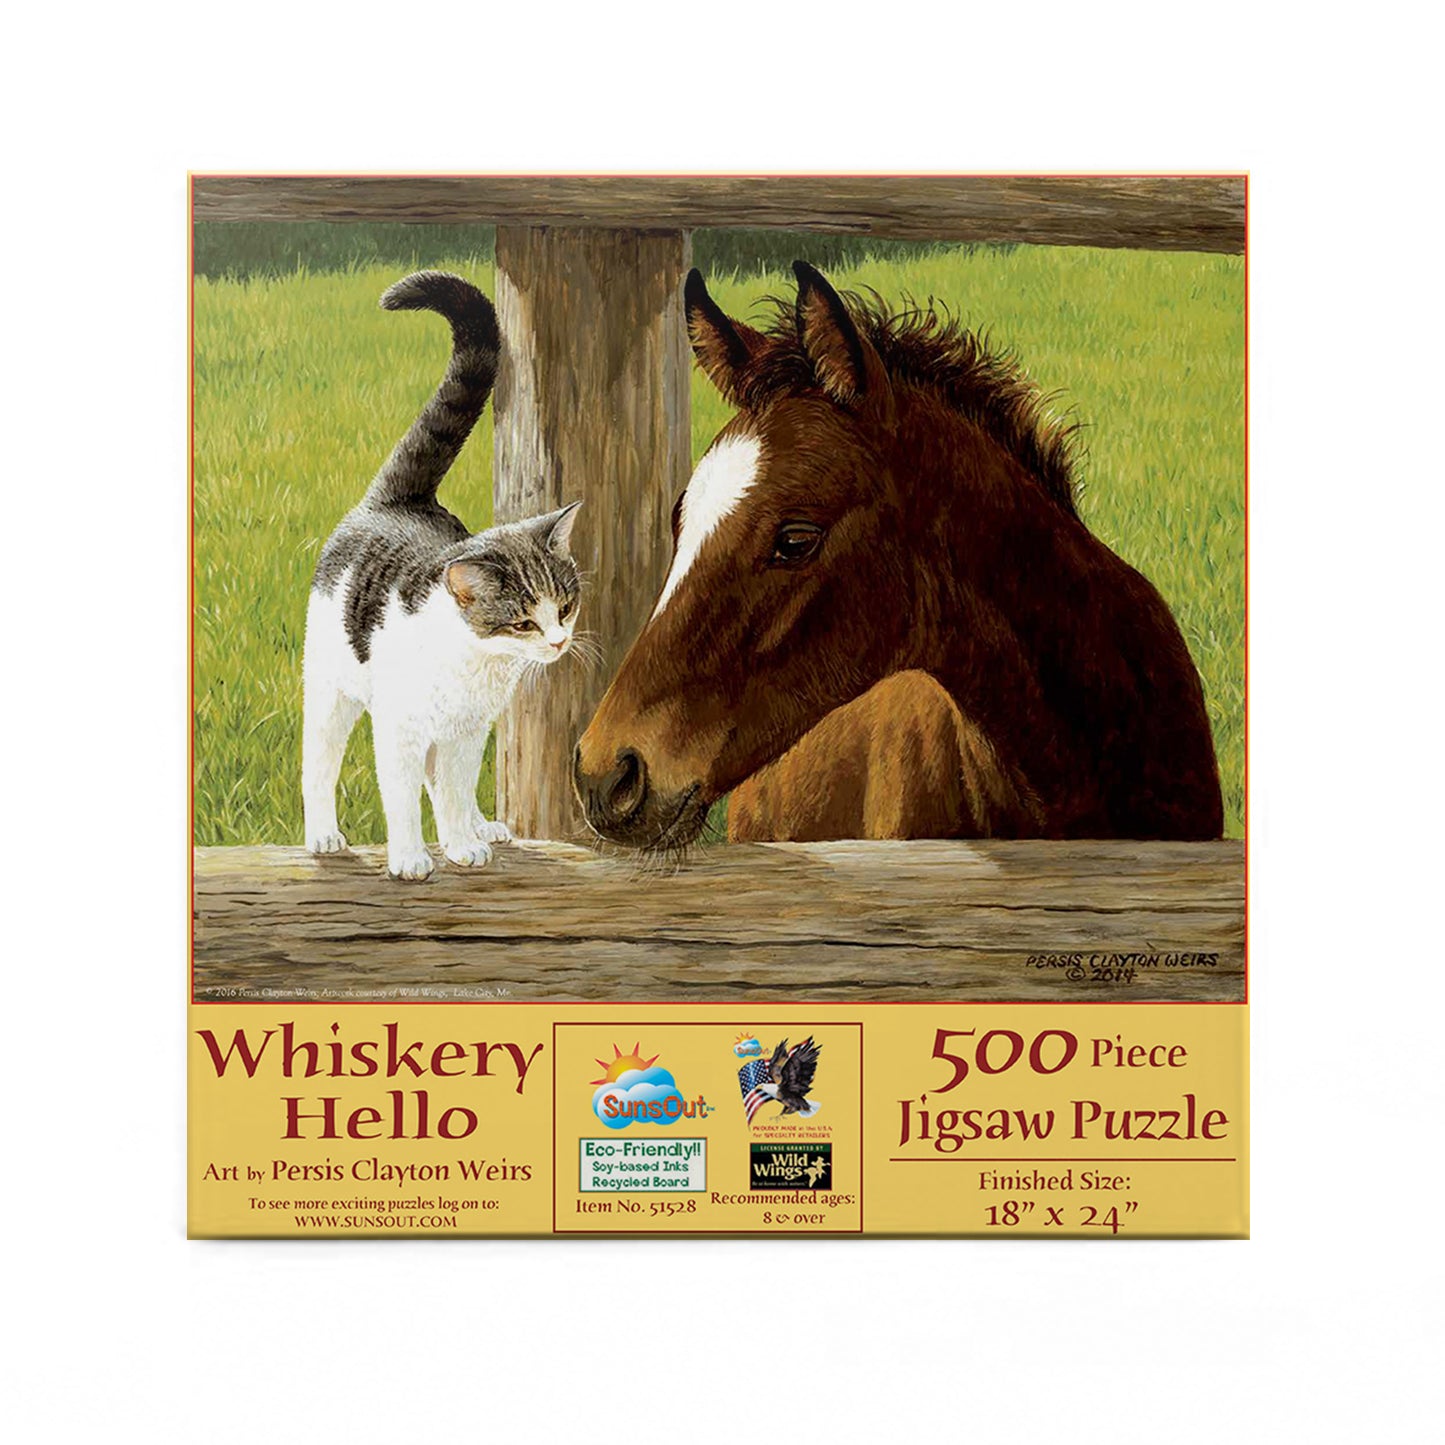 A Whiskery Hello - 500 Piece Jigsaw Puzzle